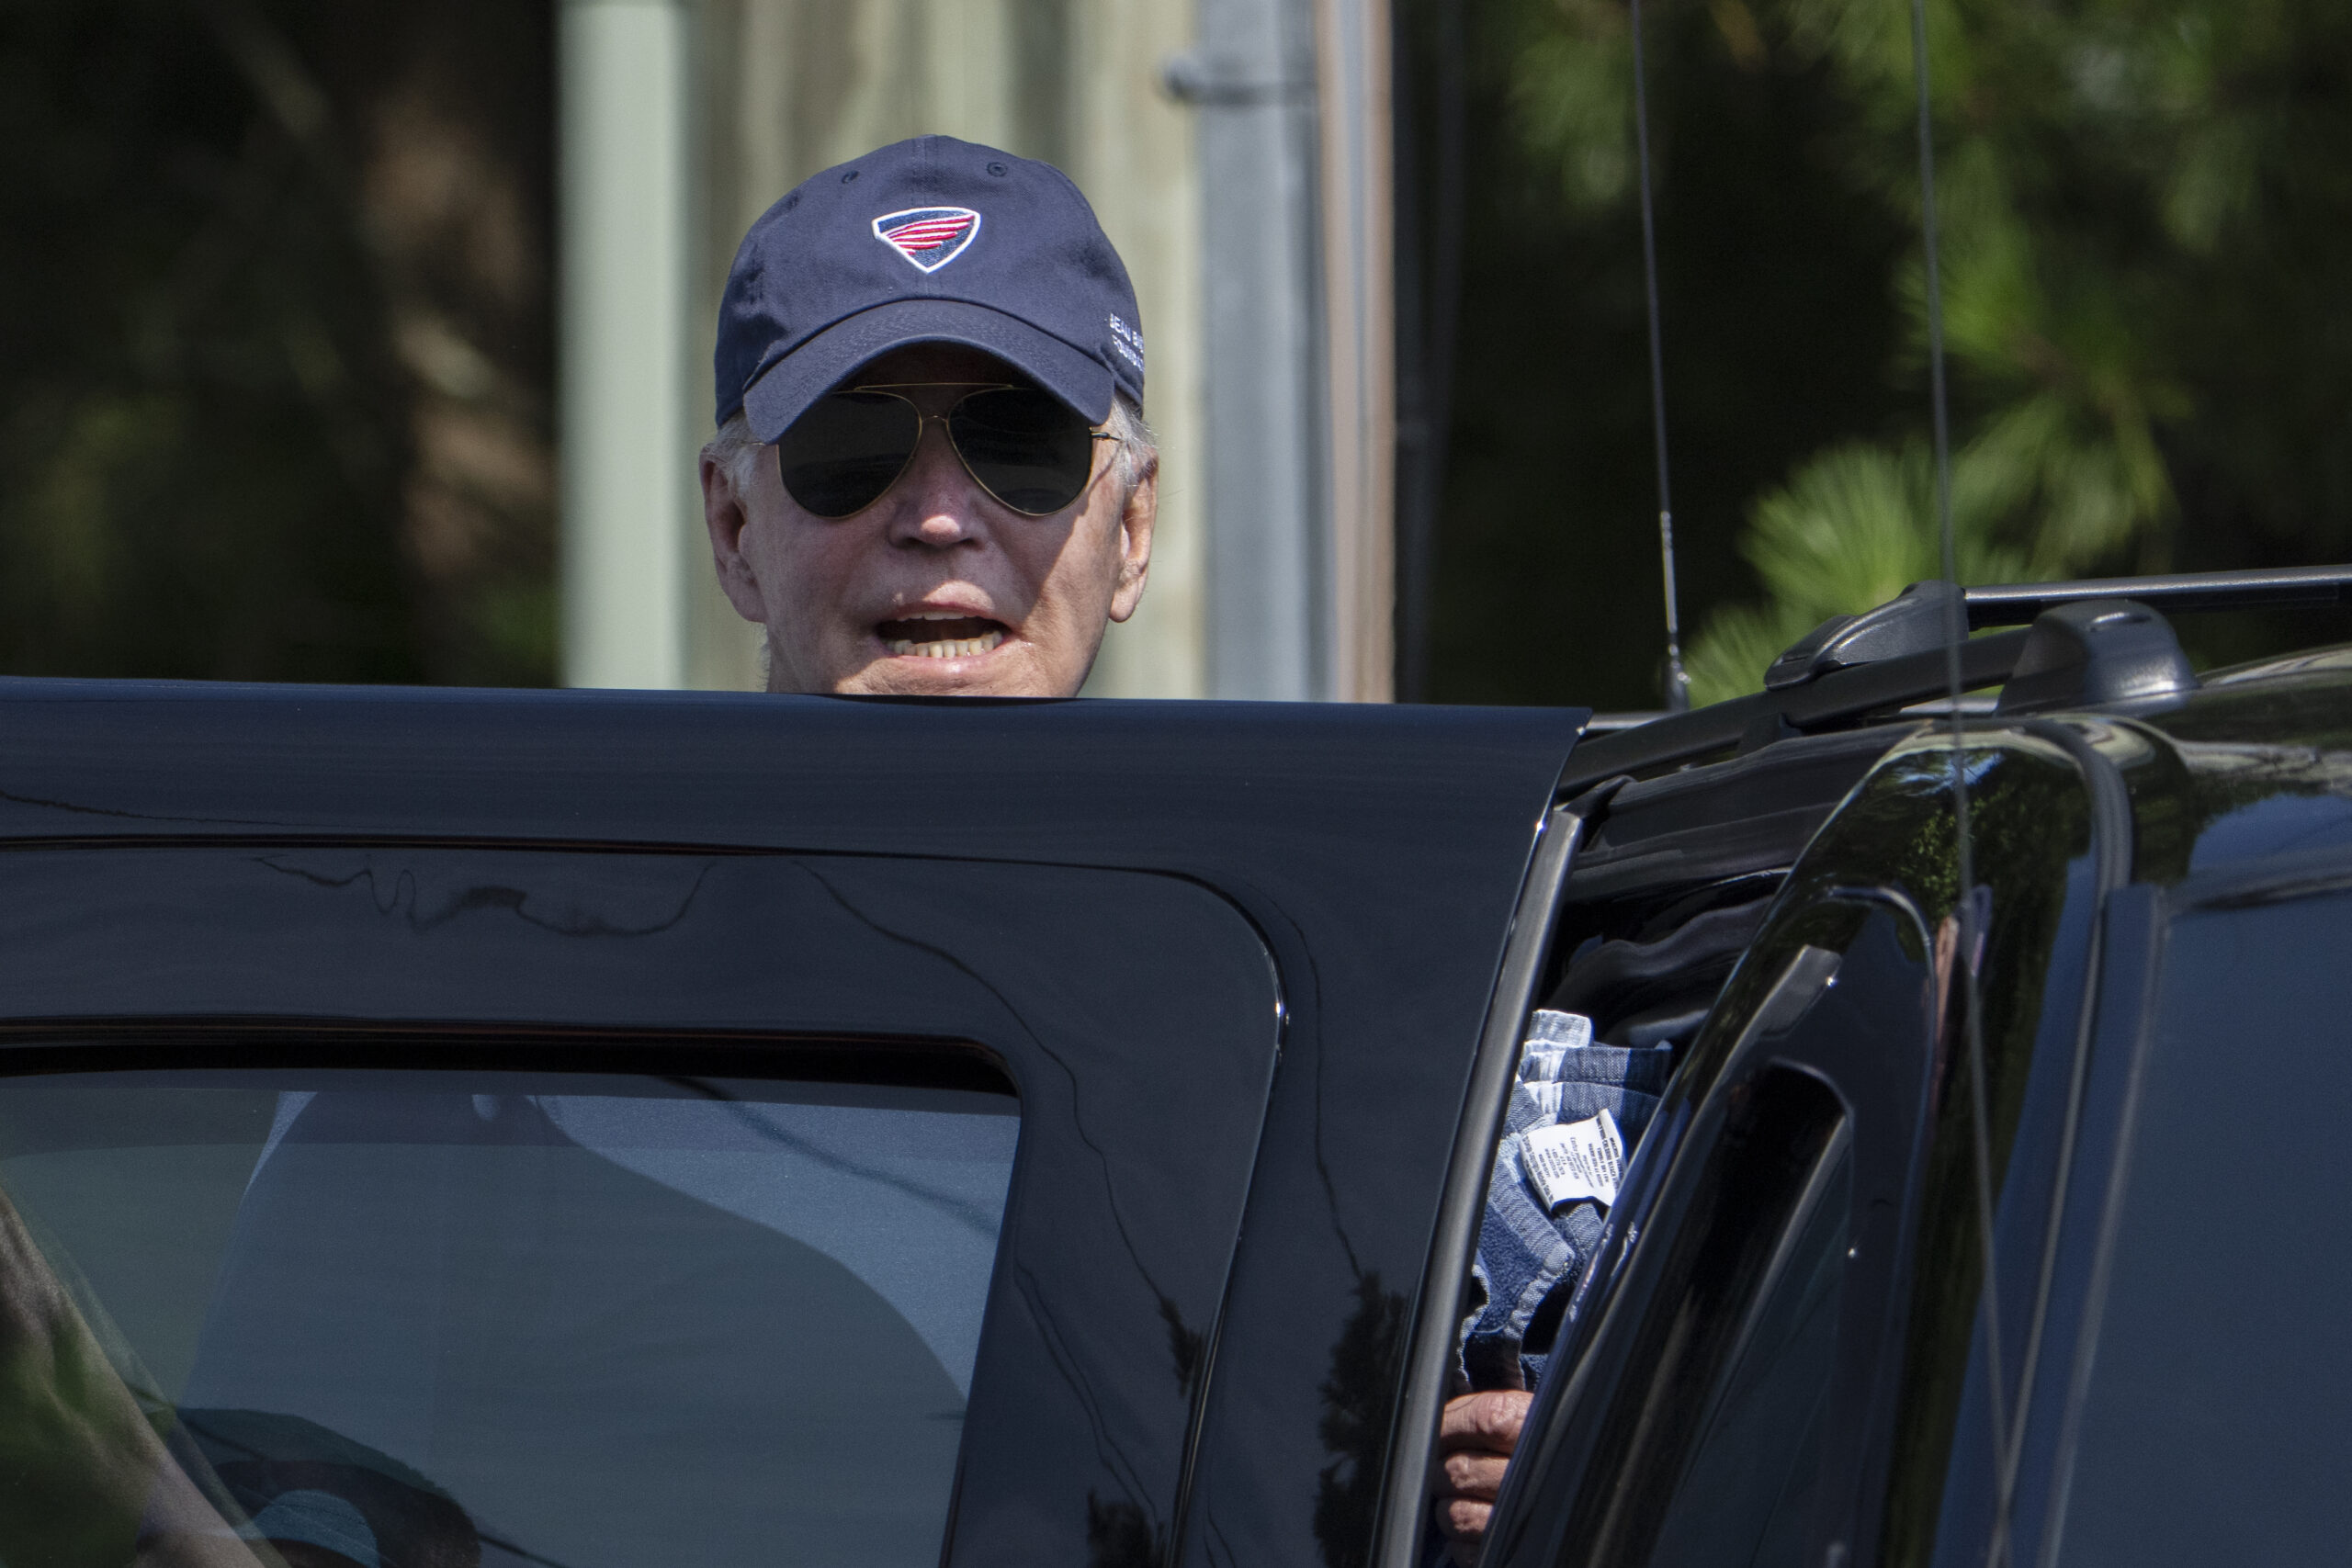 President Joe Biden responds to reporters as he gets in to his presidential vehicle in Rehoboth Bea...